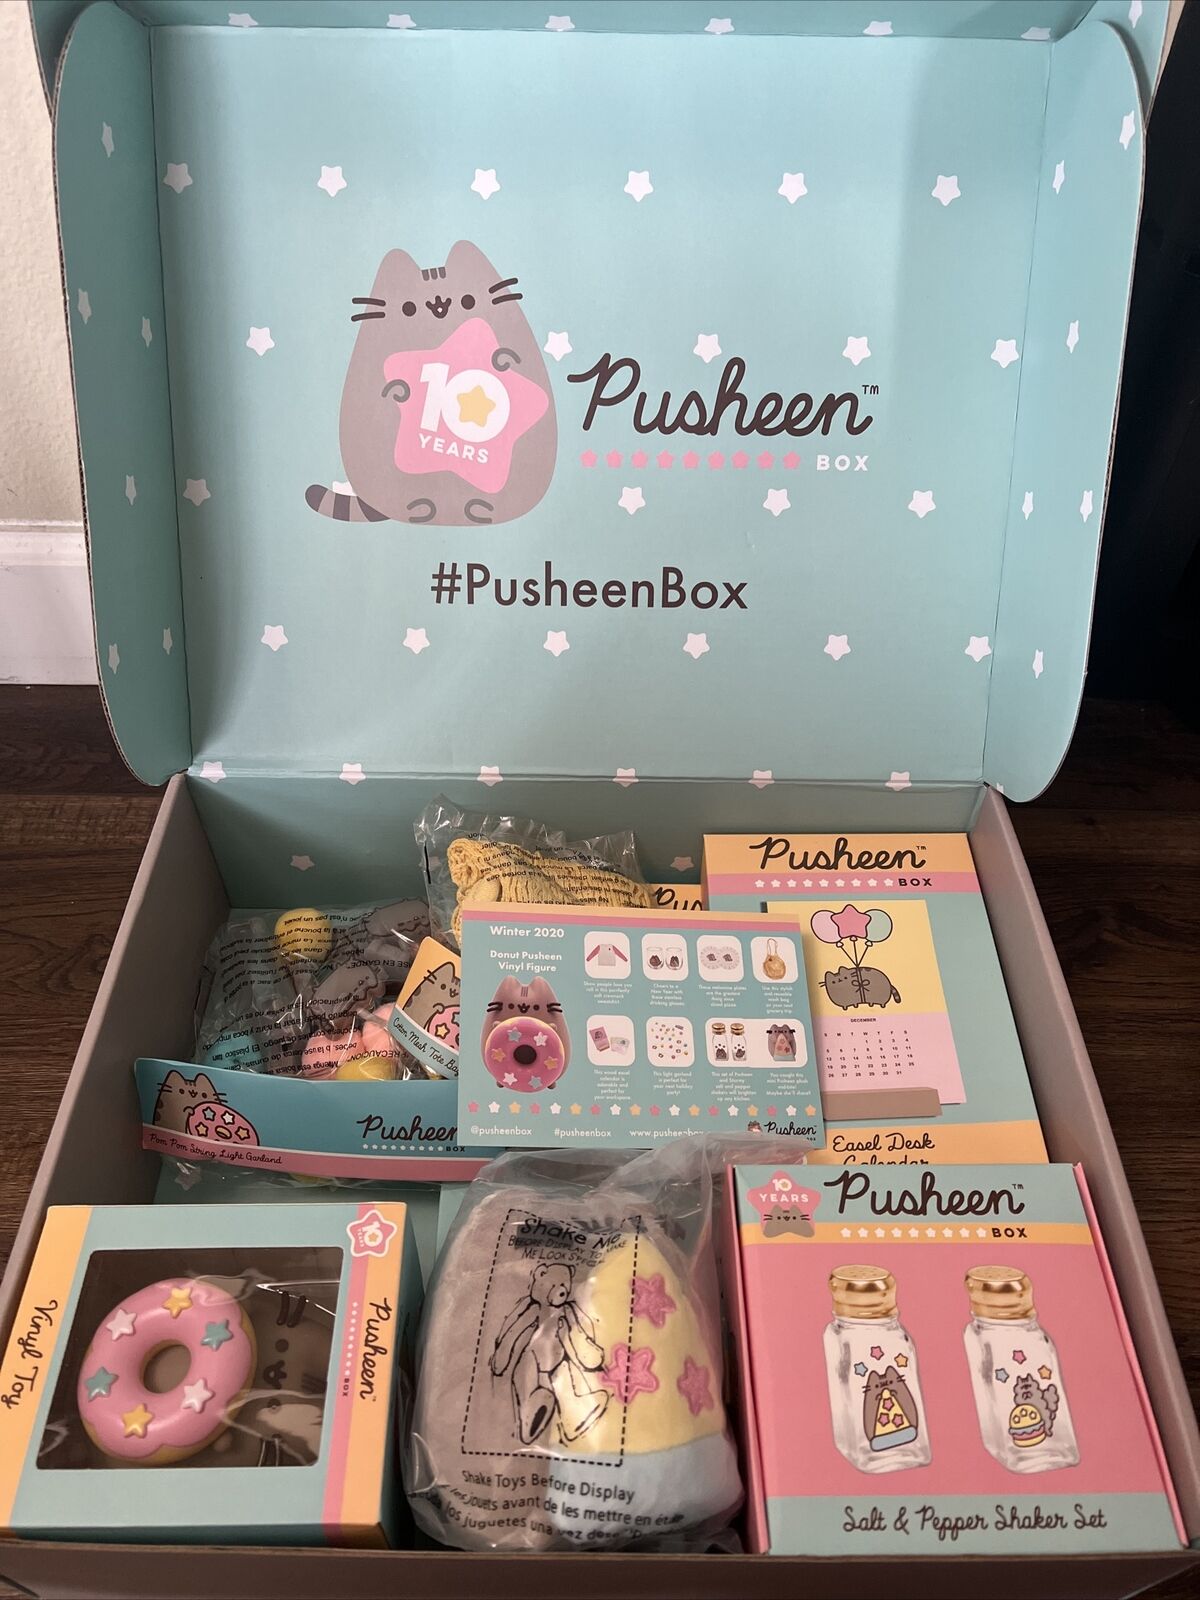 Pusheen Box 10Years Exclusive Subscrition Box - A lot of items